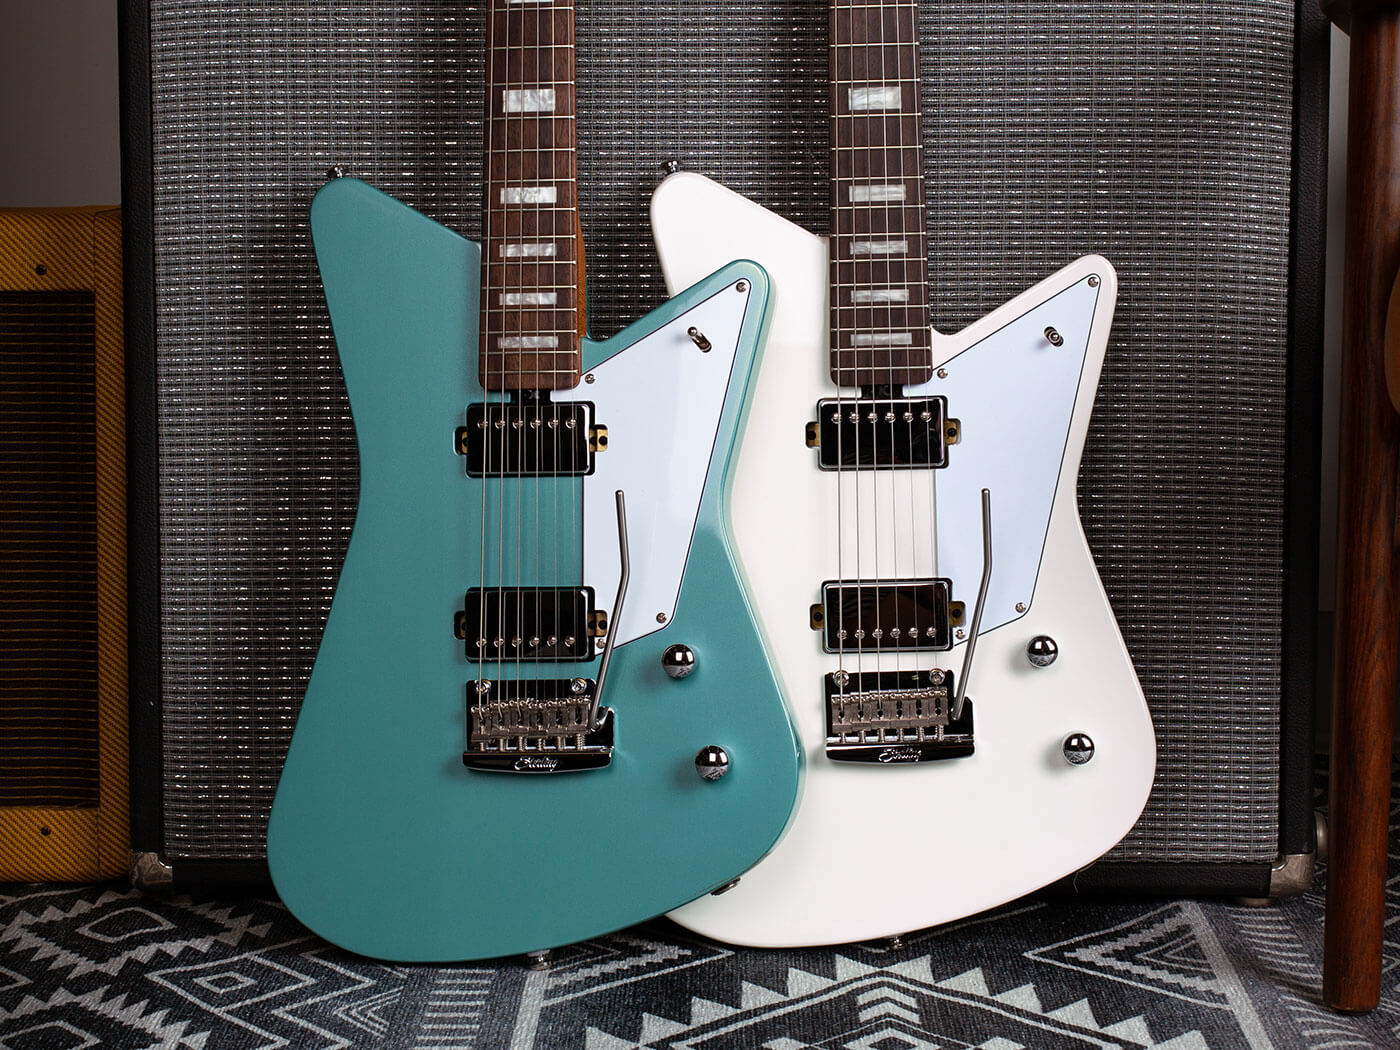 The Sterling By Music Man Mariposa's two finishes